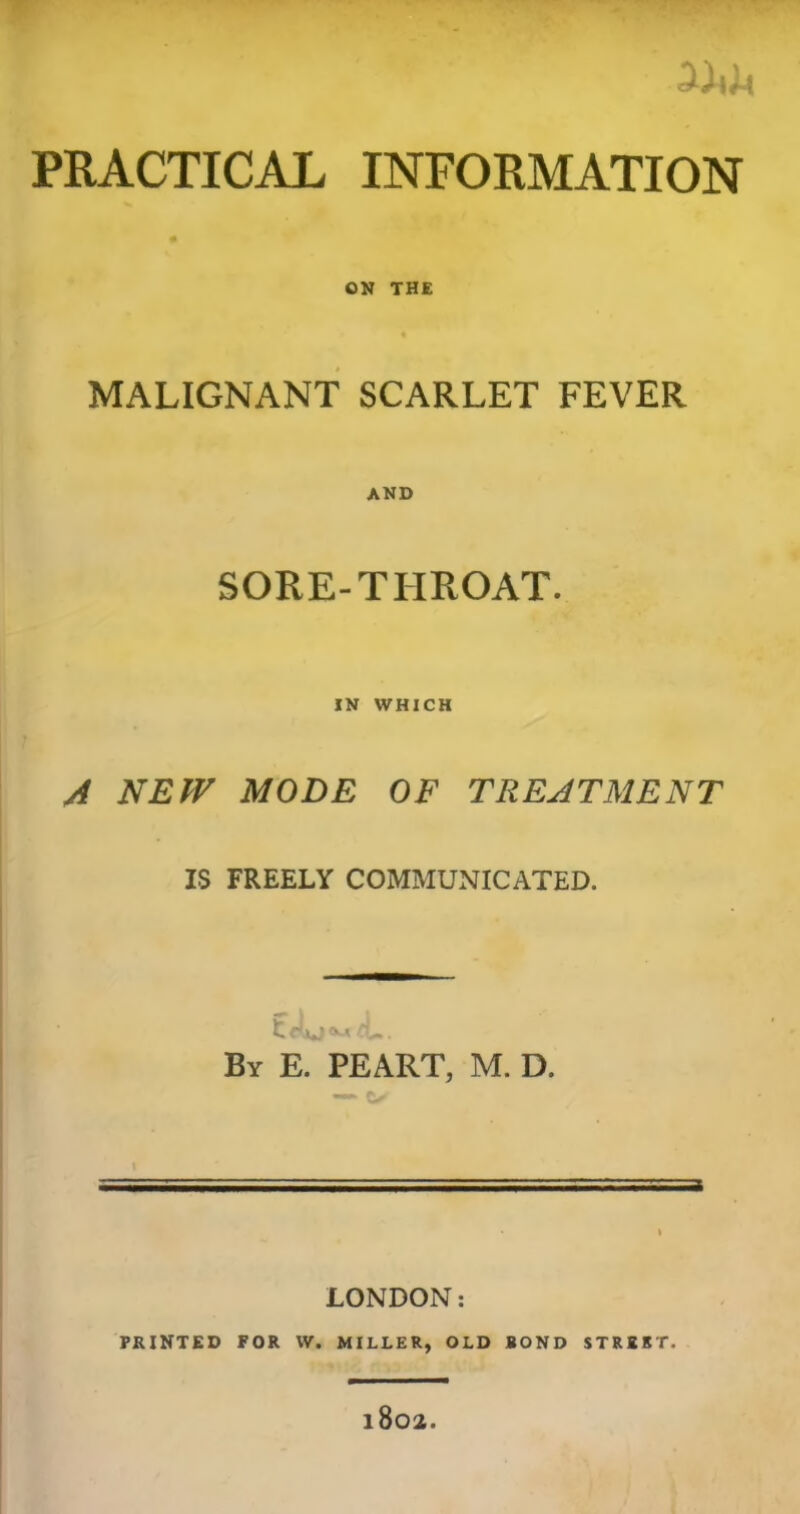 | ^ ‘ m w • PRACTICAL INFORMATION ON THE MALIGNANT SCARLET FEVER AND SORE-THROAT. IN WHICH A NEW MODE OF TREATMENT IS FREELY COMMUNICATED. By E. PEART, M. D. LONDON: PRINTED FOR W. MILLER, OLD BOND STRUT. l802.